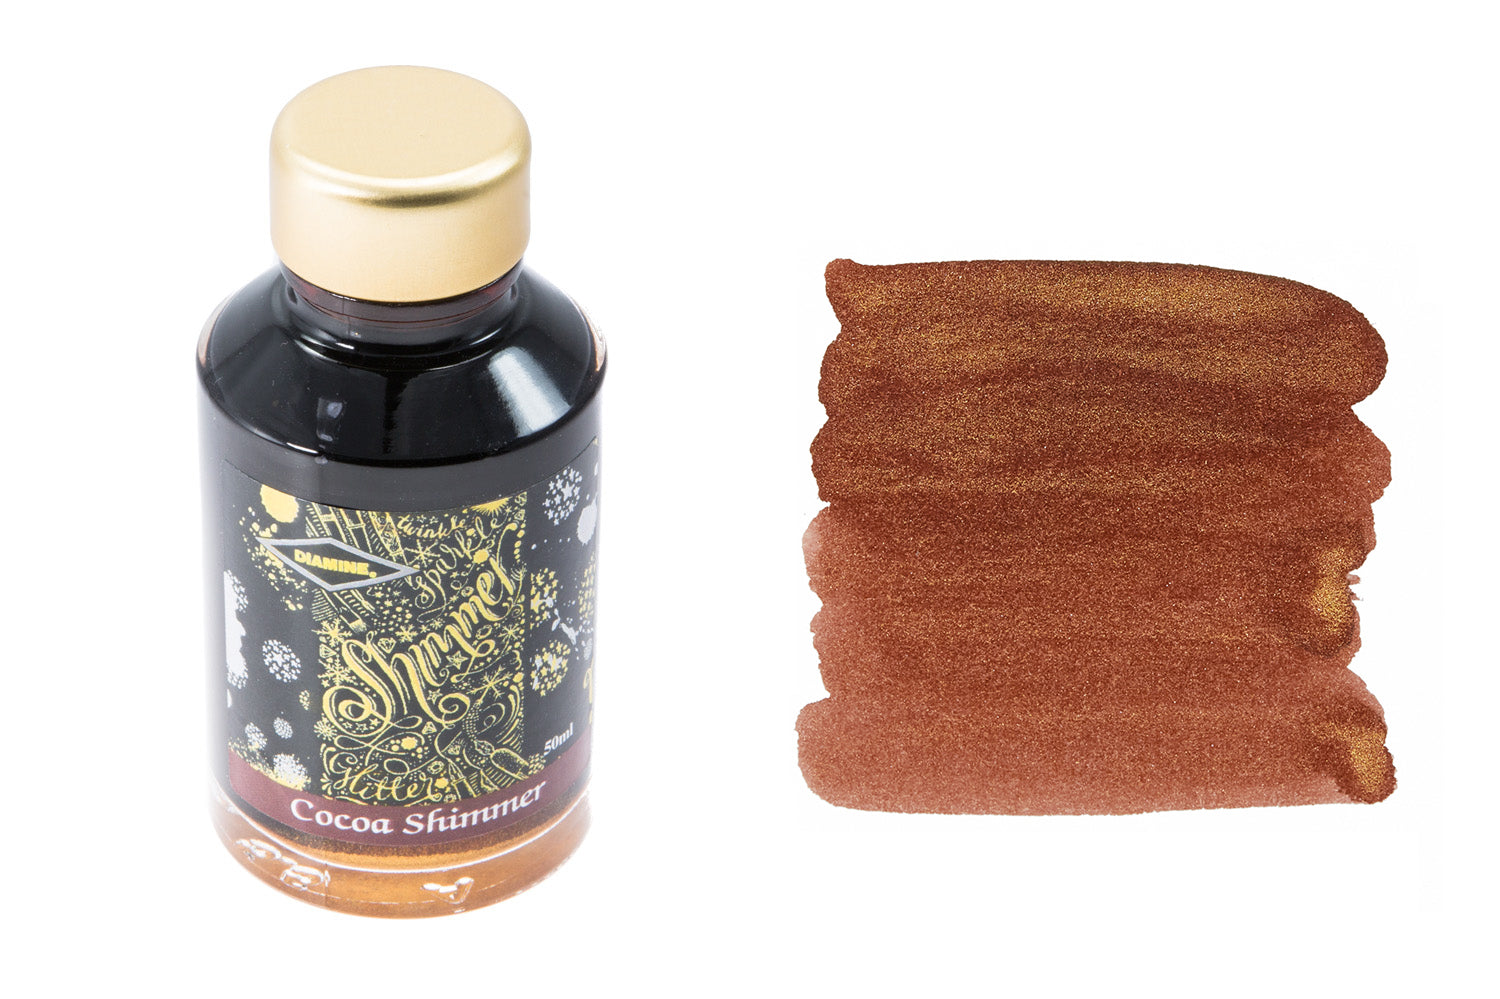 Diamine Cocoa Shimmer fountain pen ink bottle with swab